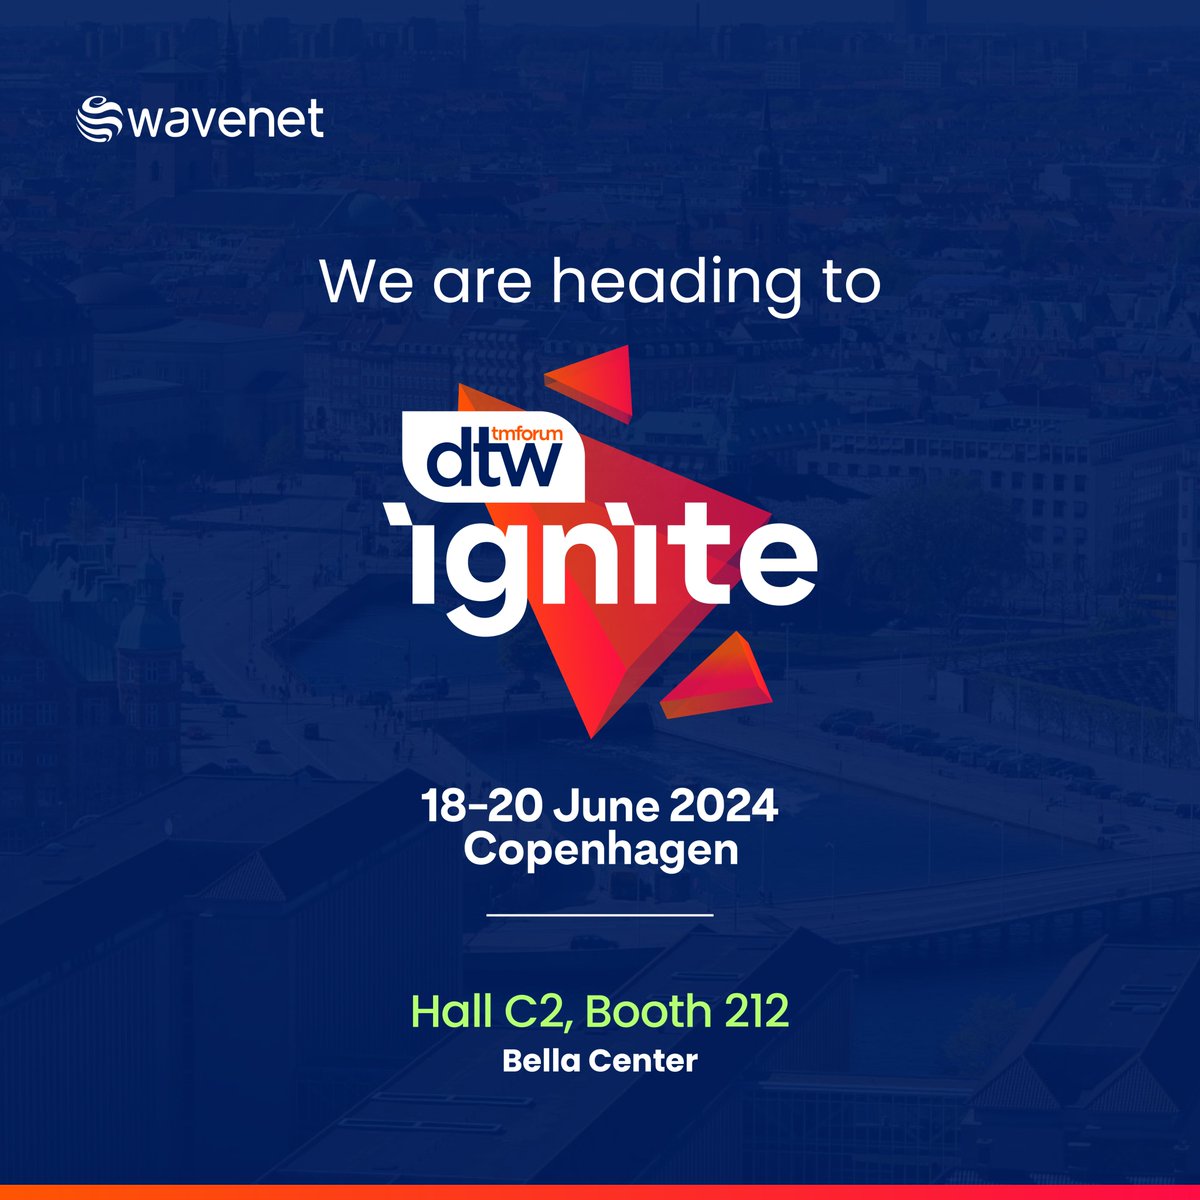 Mark your calendars 📅 we will be at #DTW24 Ignite 2024, this June 18-20! The Bella Center, #Copenhagen - Hall C2, Booth 212, will be abuzz with the brightest minds in #AI-driven #telecommunication and #digitaltransformation.  

#Future #Tech #Ignite #Innovation #Wavenet #Telco